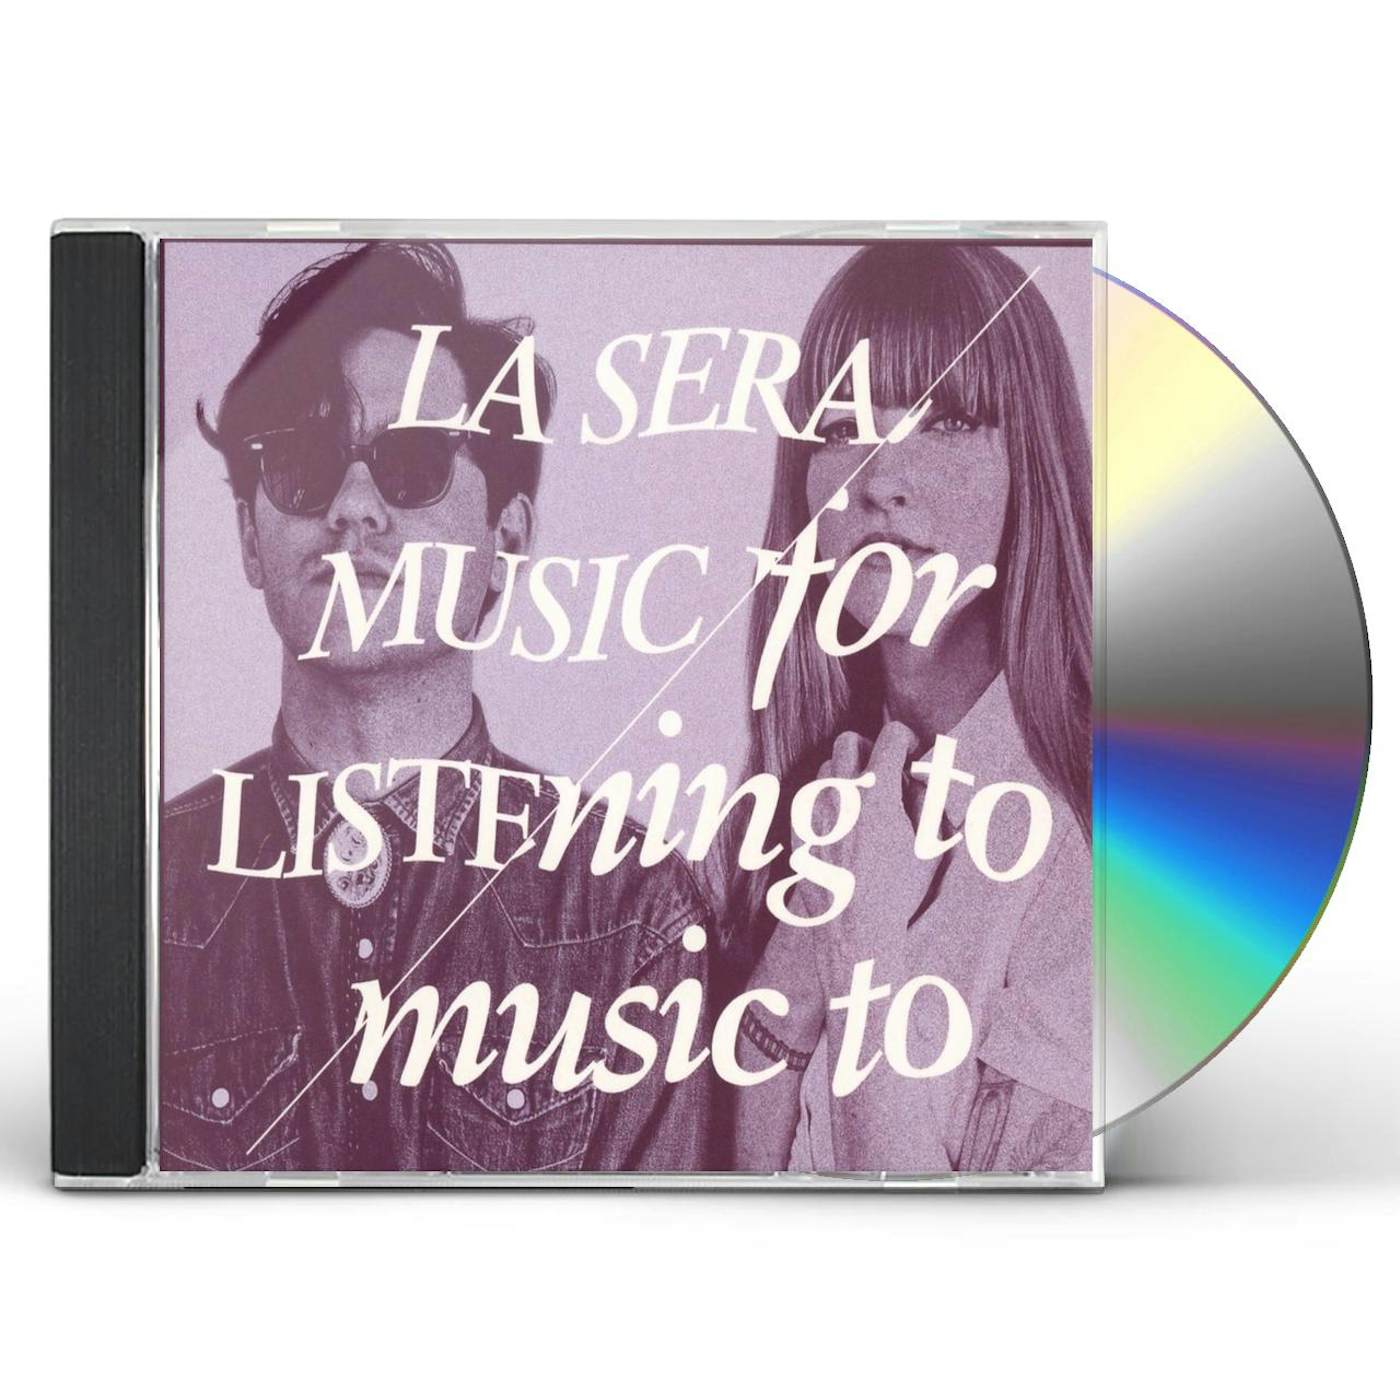 La Sera MUSIC FOR LISTENING TO MUSIC TO CD